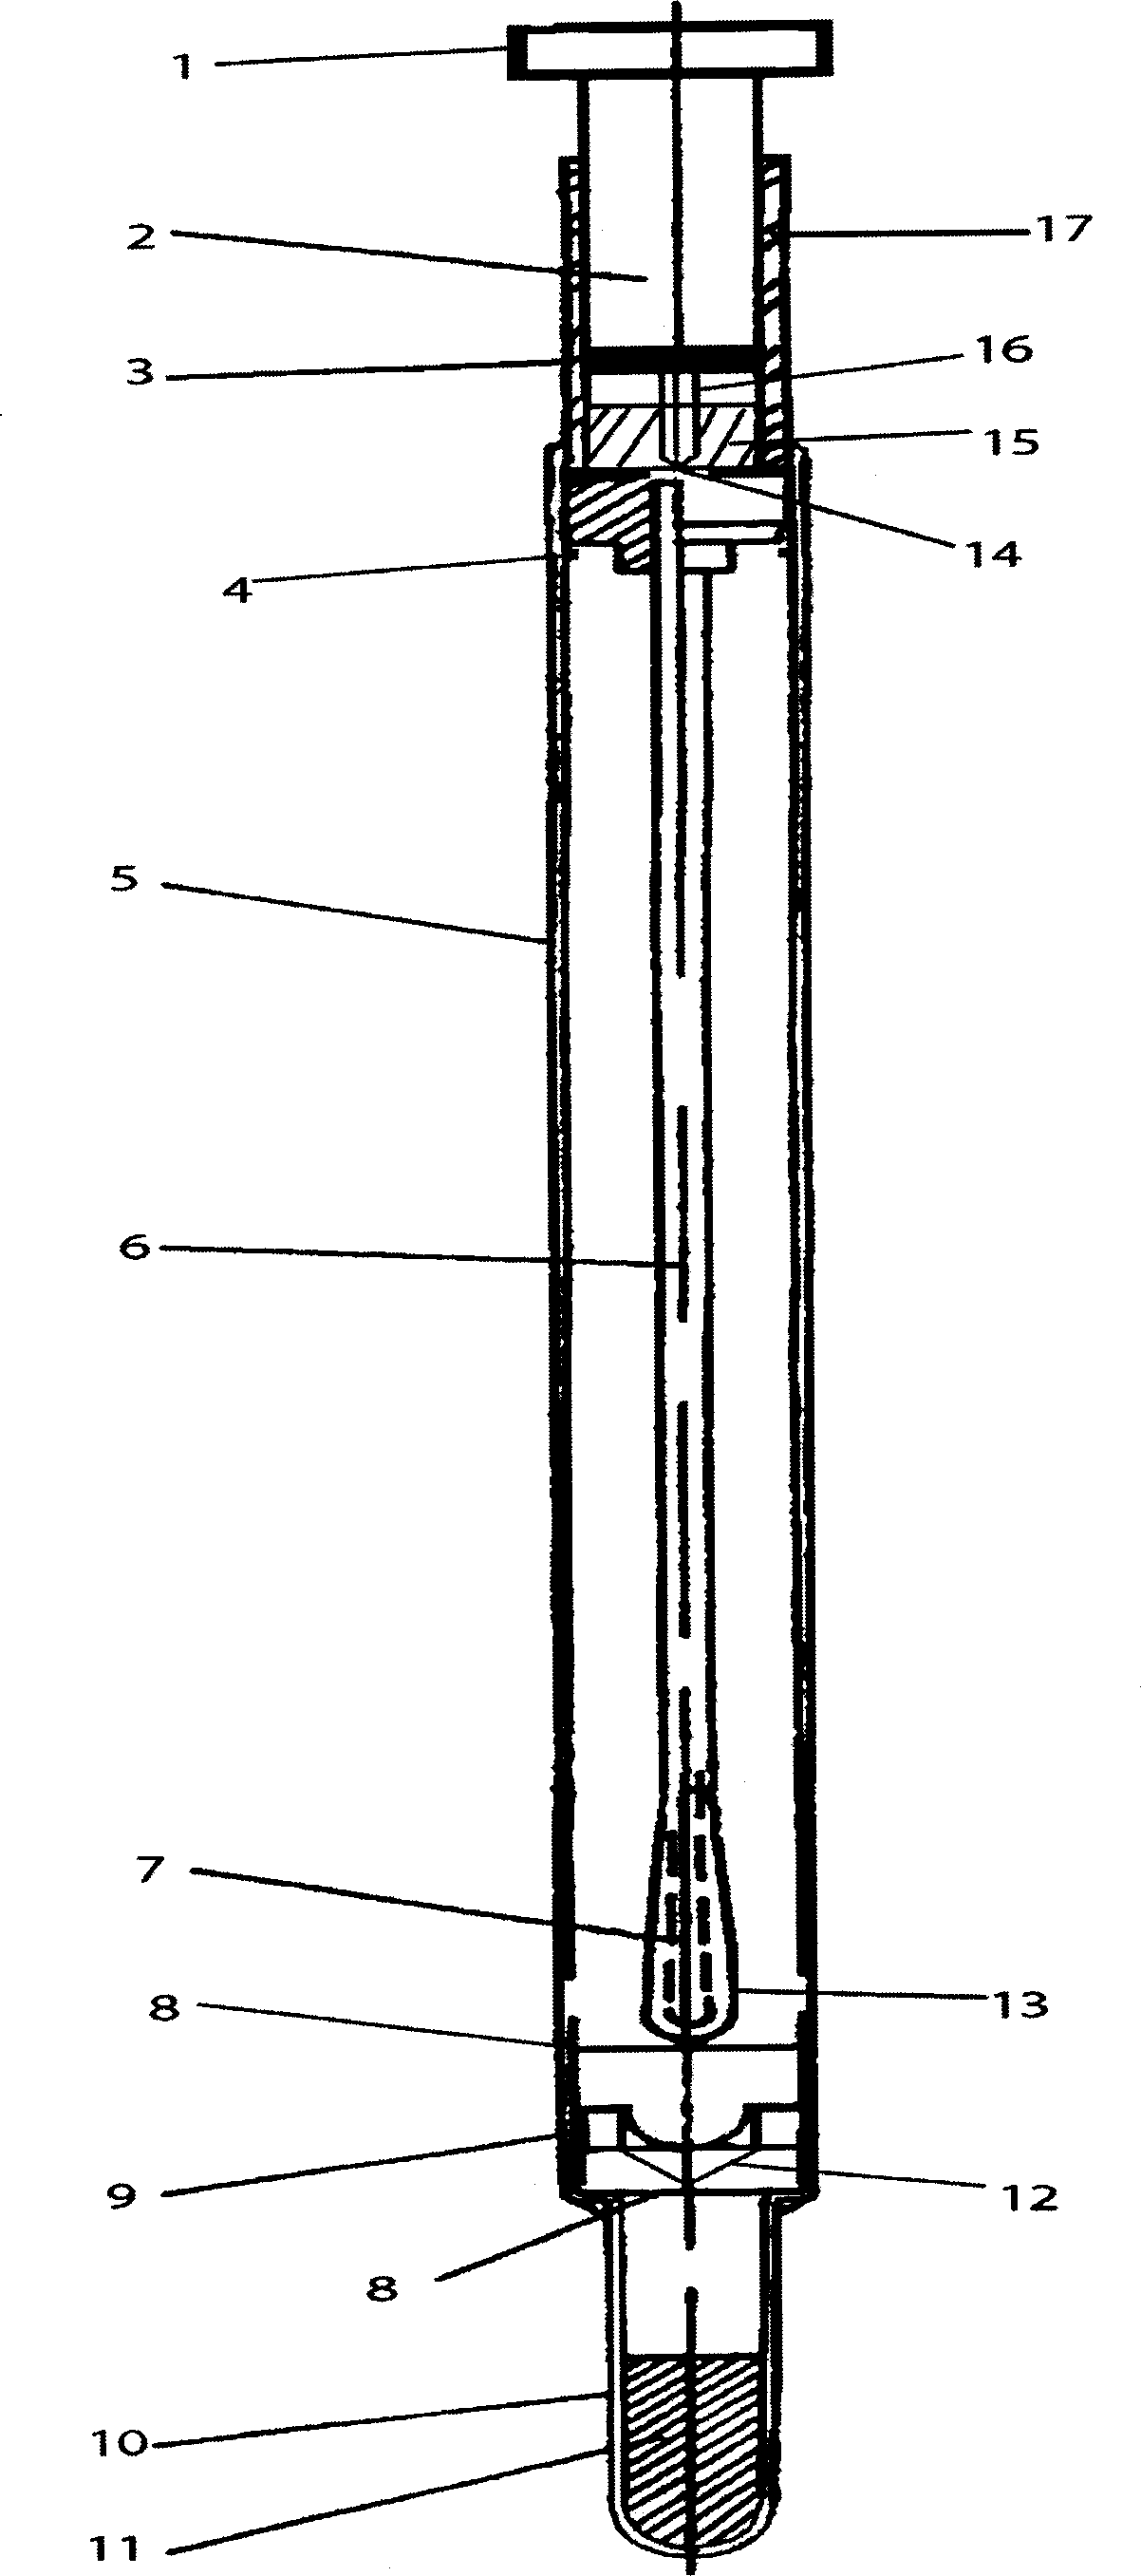 Apparatus and method for quick detection of surface cleanness degree and microbe contamination